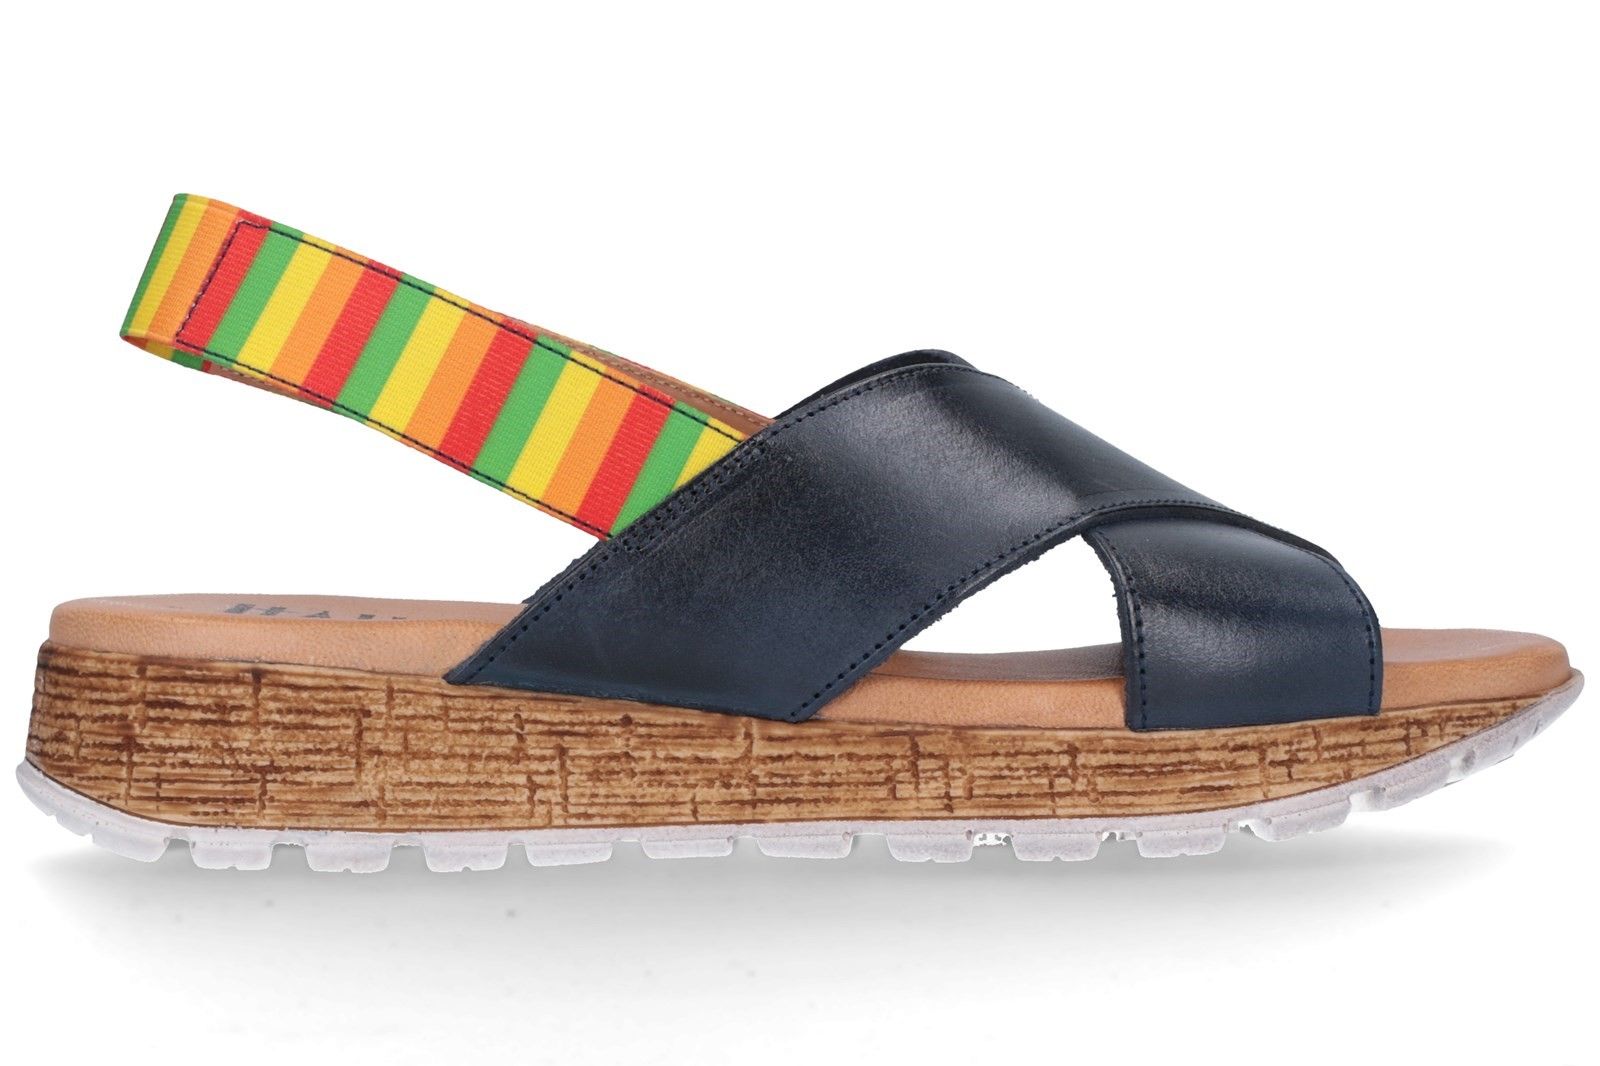 Open toe sling back sandal from Riva.Grenada open toe sandals from Riva. 
Supple leather strappy uppers. 
Slingback multicoloured stripes elasticated strap. 
Luxury padded foot bed. 
Cork textured sole.